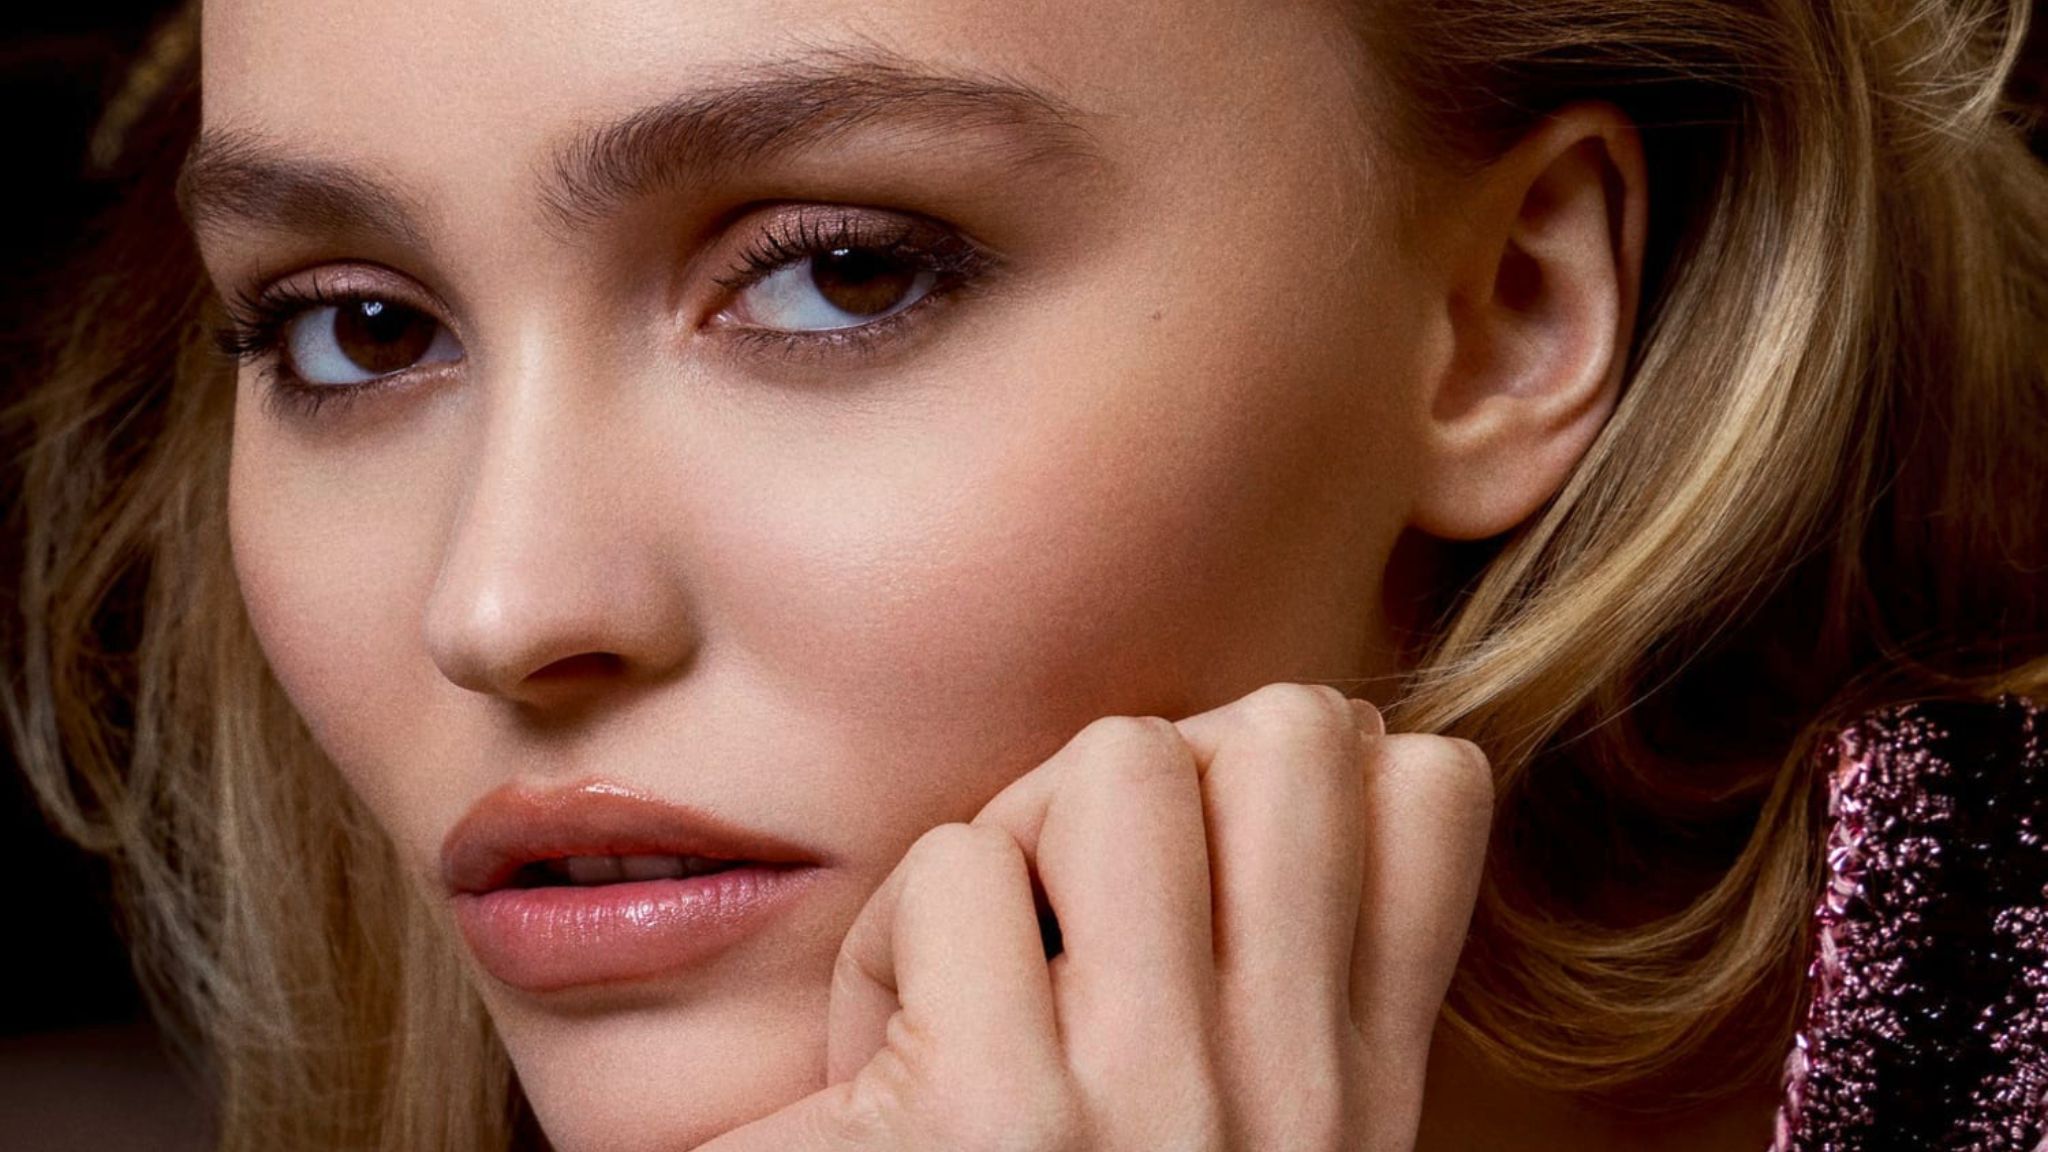 Lily Rose Depp is the New Muse of the Première Édition Originale Watch